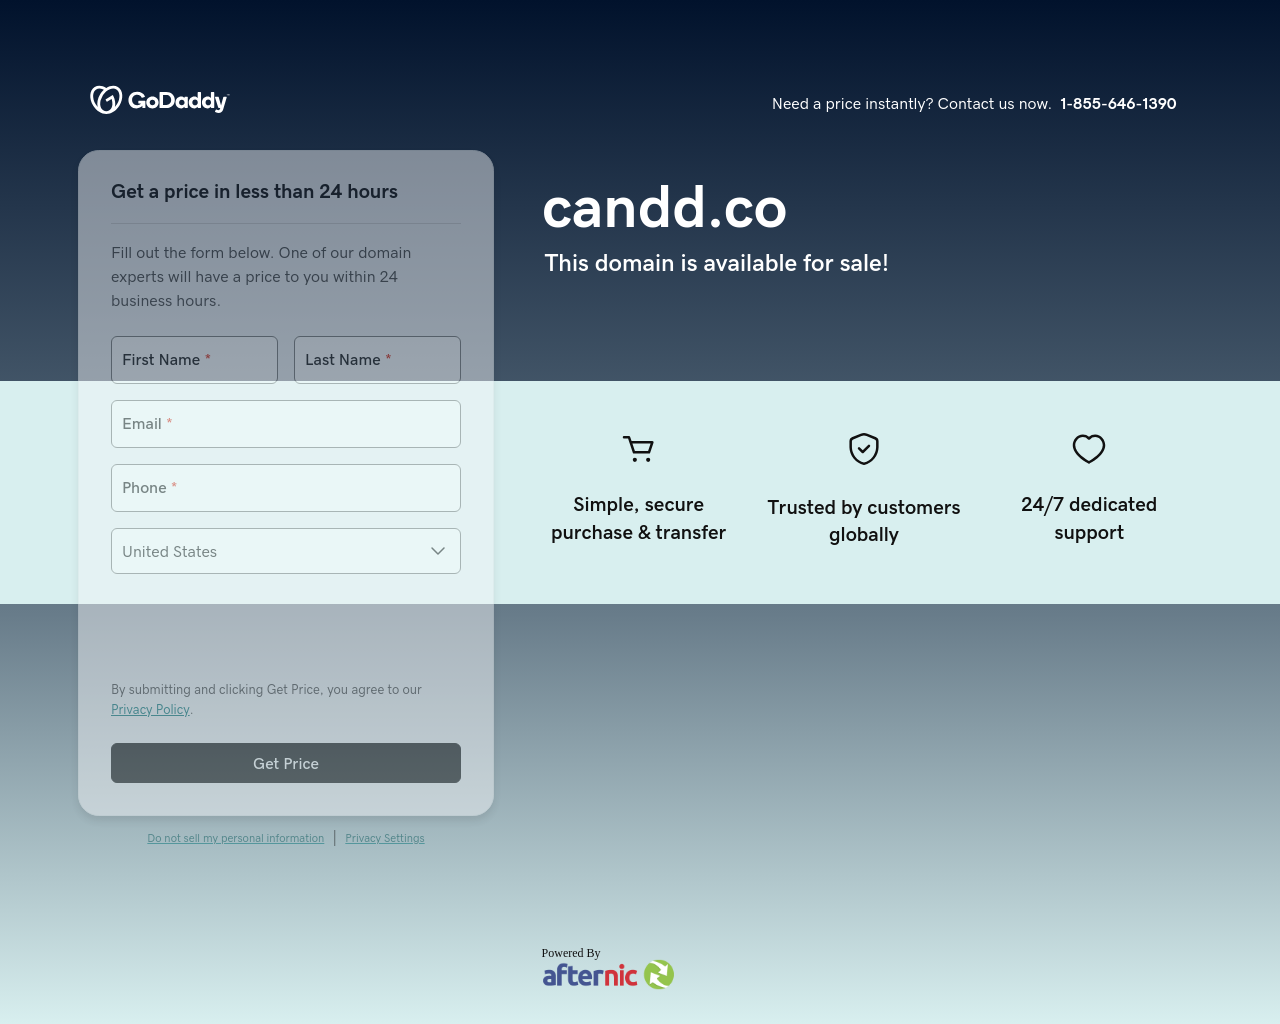 candd.co